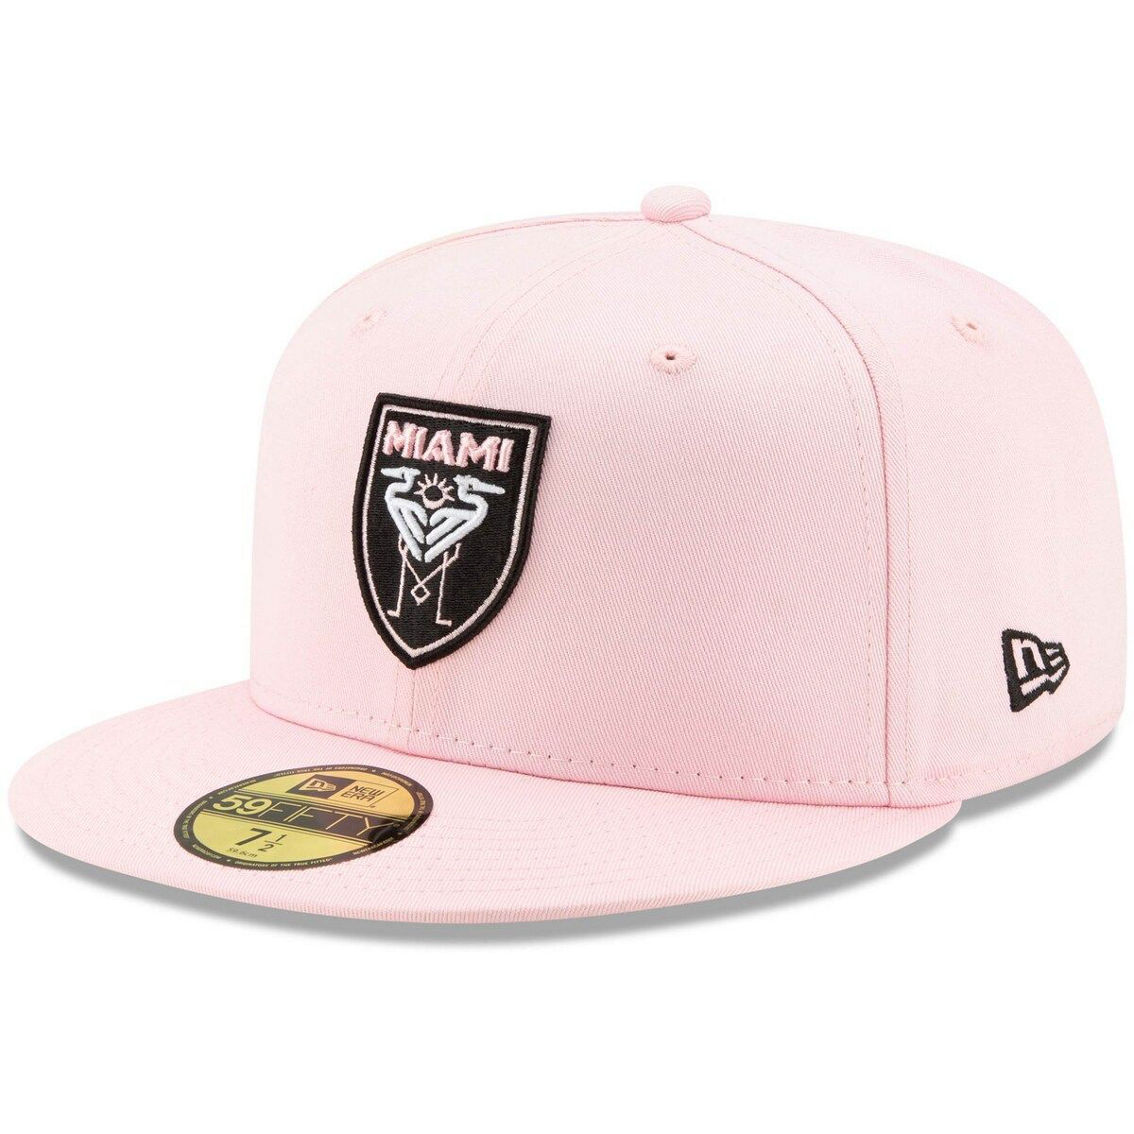 Men's New Era Pink Inter Miami CF Primary Logo 59FIFTY Fitted Hat - Image 2 of 4